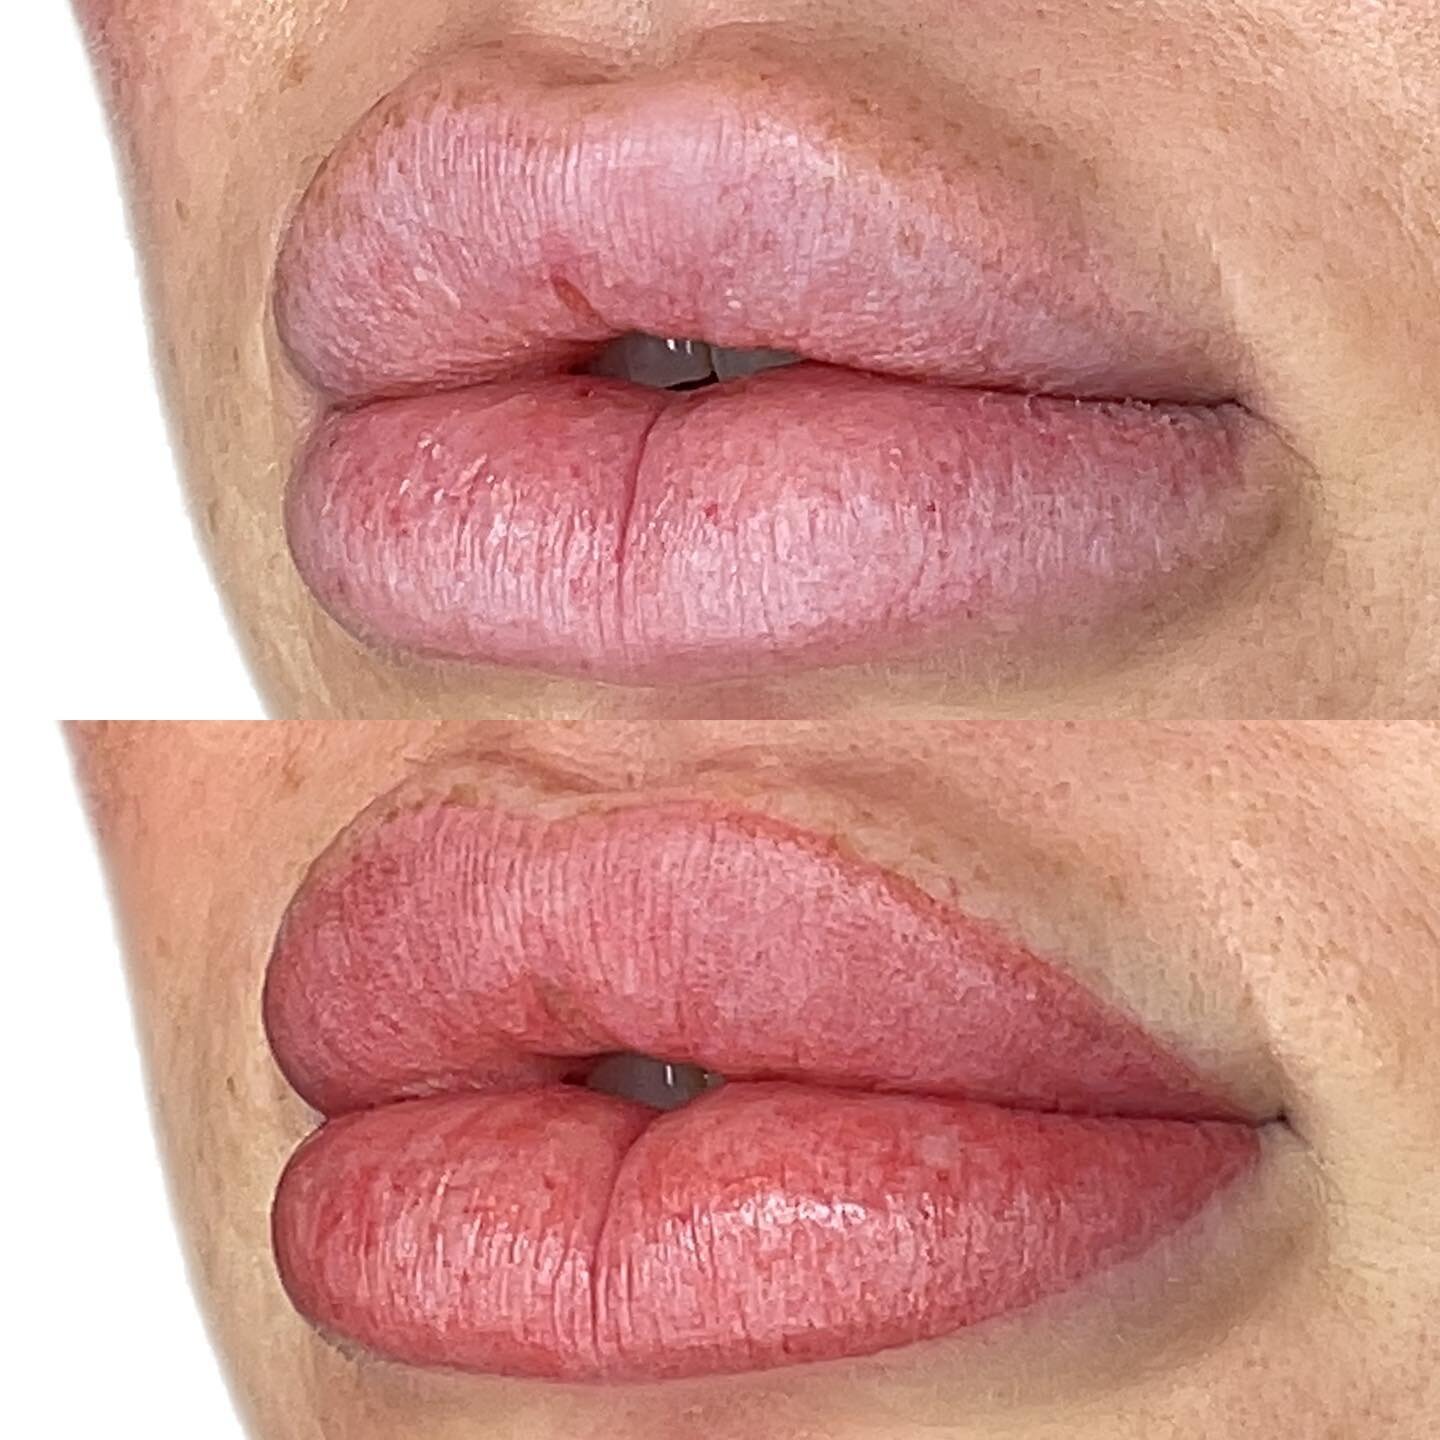 First session lip blush 💋

⏩︎ More defined border
⏩︎ Enhanced colour

Her healed results from this session will be very soft and natural. We will follow up with a second session in six weeks to add more layers of shading for a bolder and more define